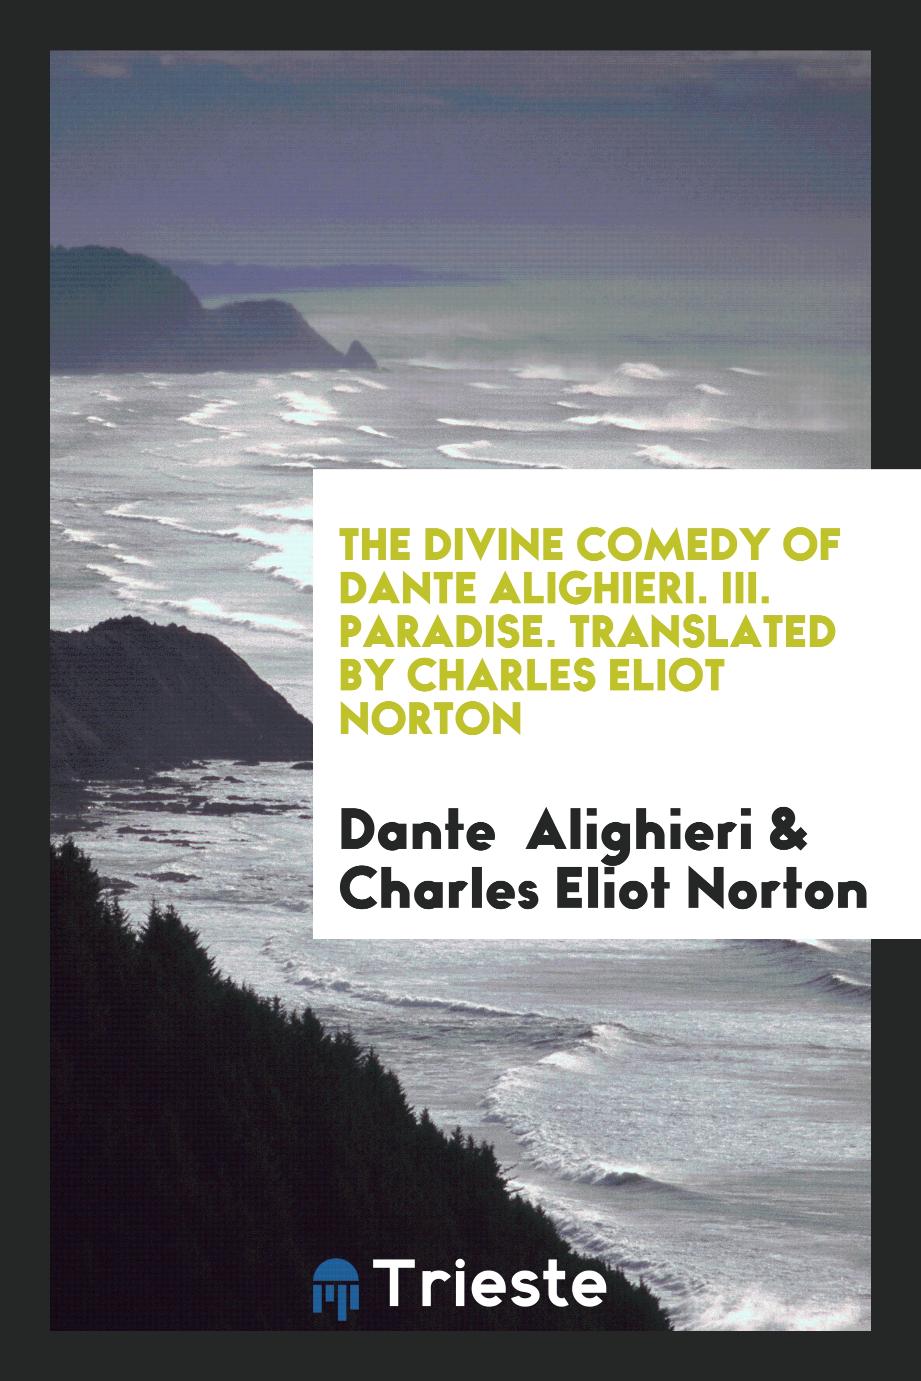 The Divine Comedy of Dante Alighieri. III. Paradise. Translated by Charles Eliot Norton